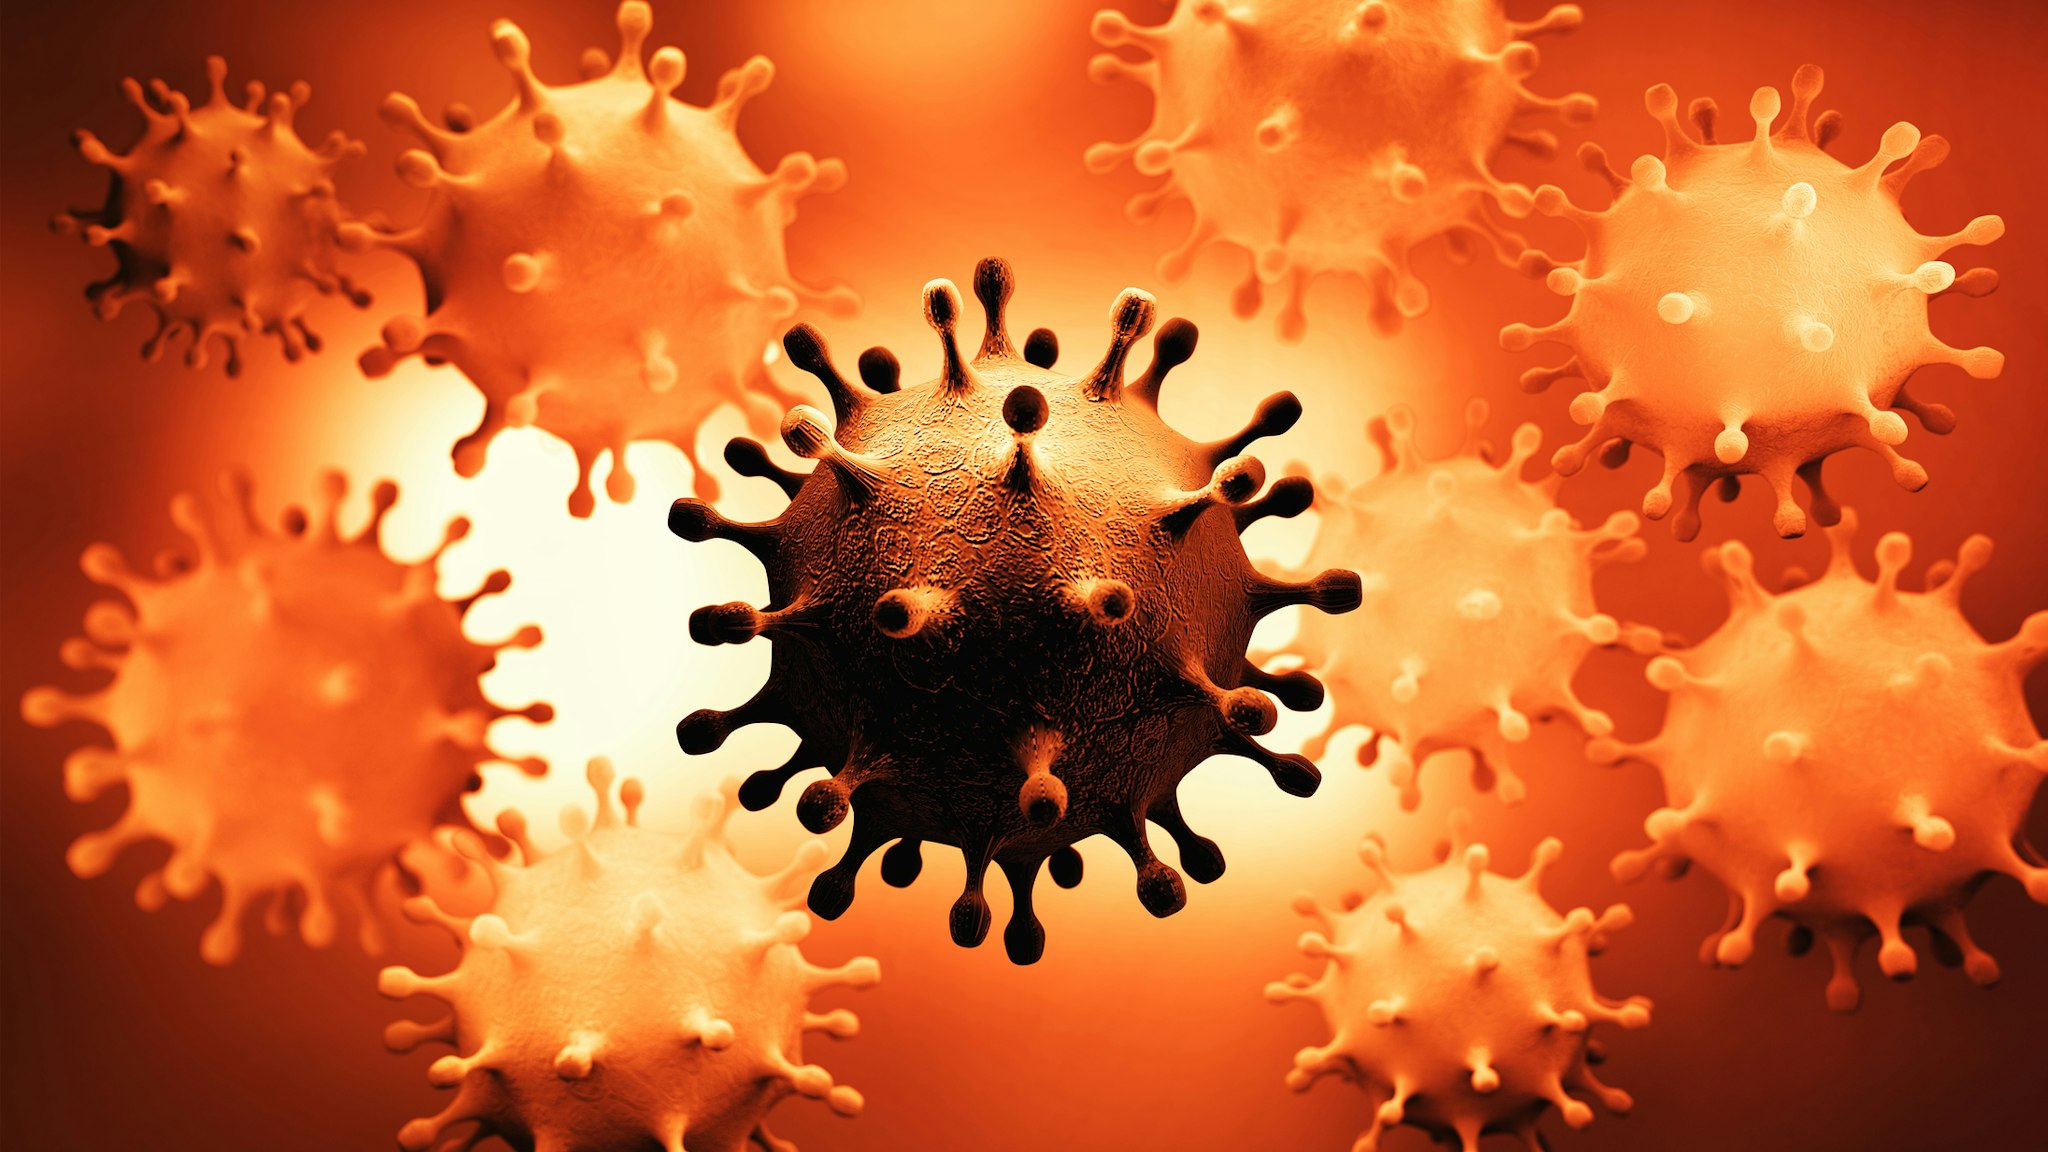 3D Rendering,Human coronavirus.coronavirus (nCoV) is a new strain that has not been previously identified in humans.Can cause colds as well as Middle East Respiratory Syndrome (MERS) and Severe Acute Respiratory Syndrome (SARS)